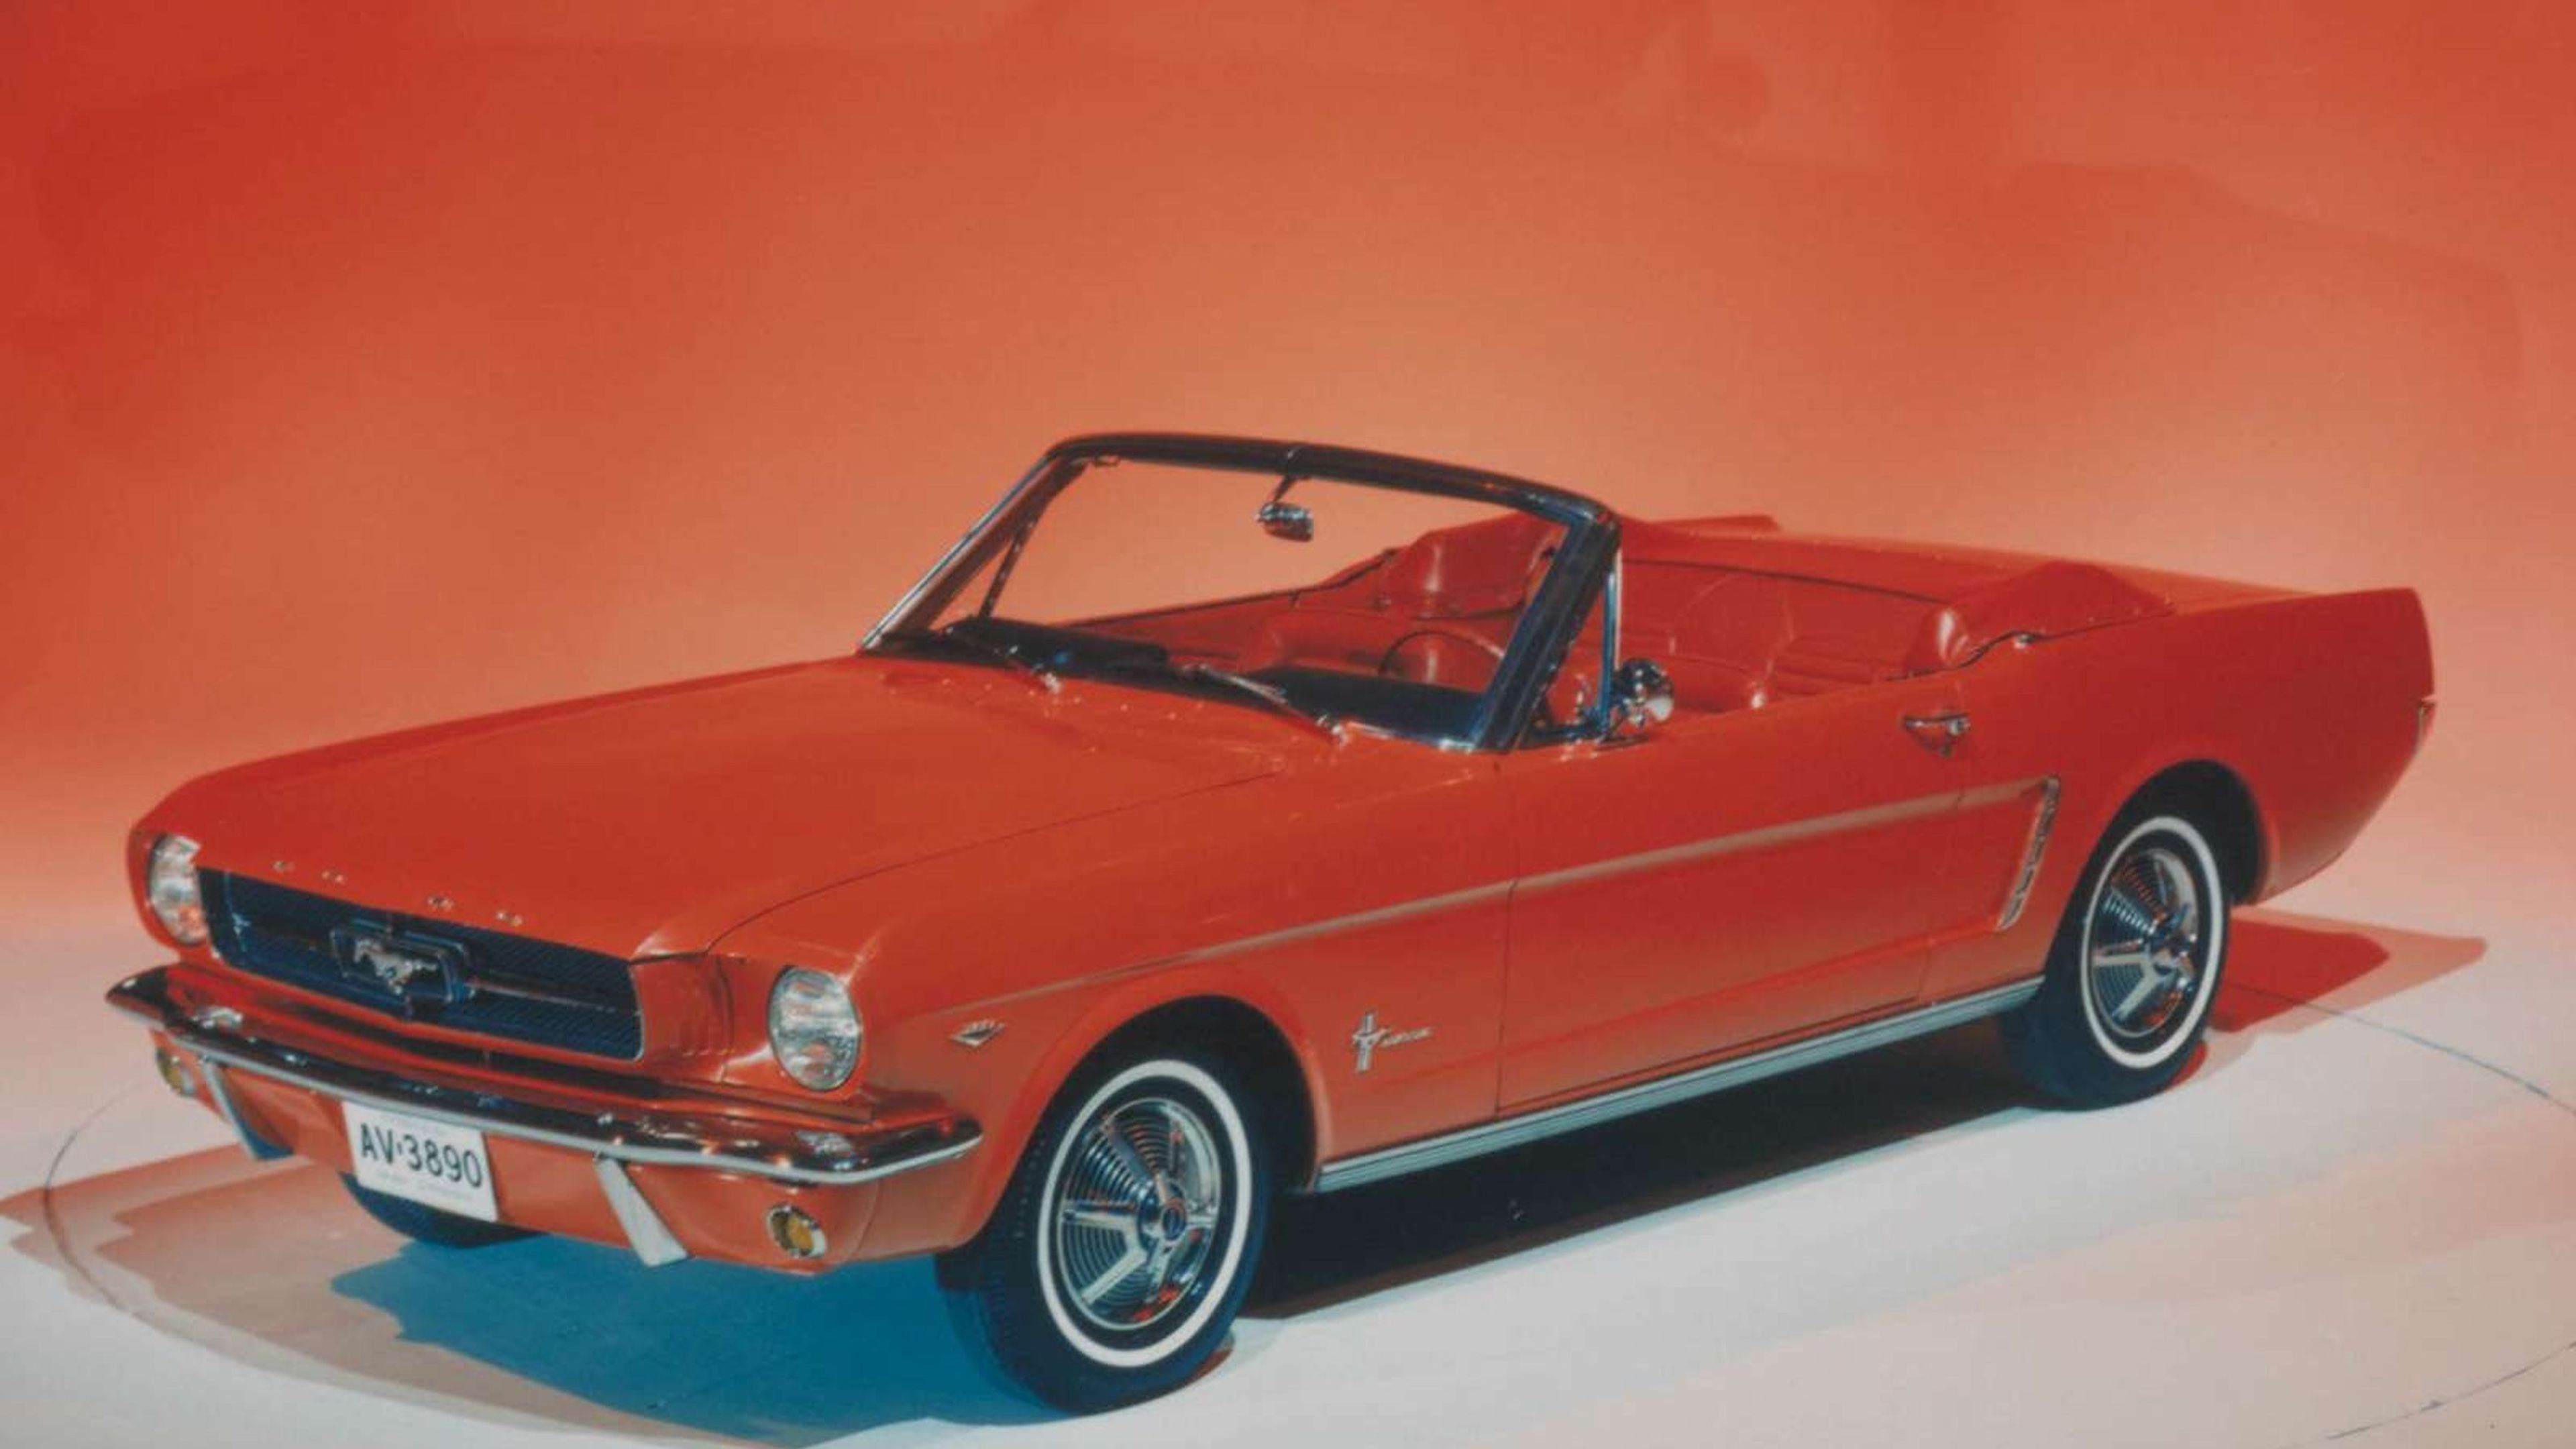 historia-ford-mustang-60-anos-3306688.jp